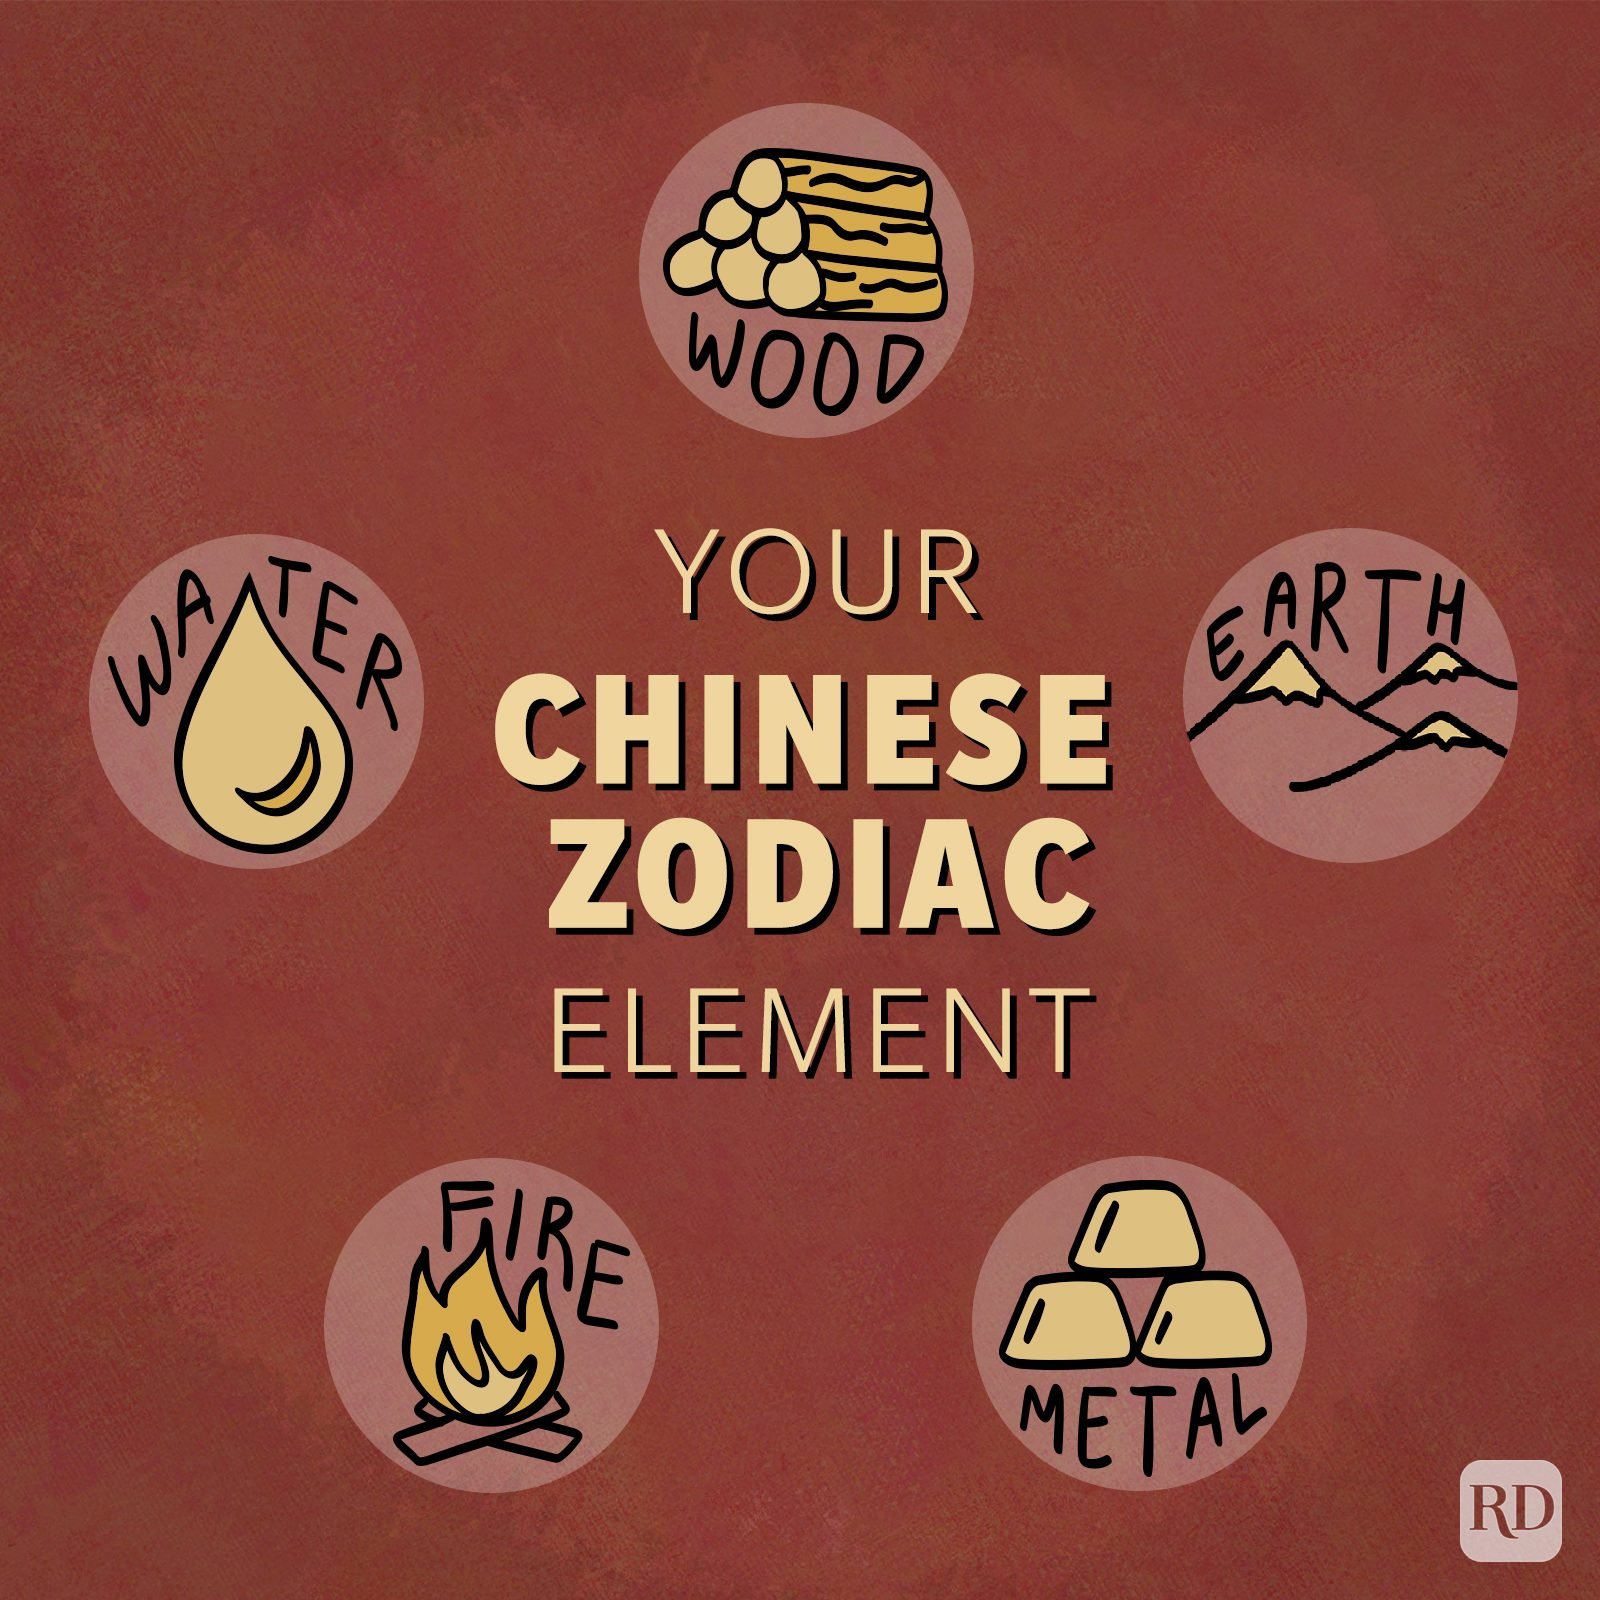 Chinese Zodiac Elements What They Are and What They Mean for You